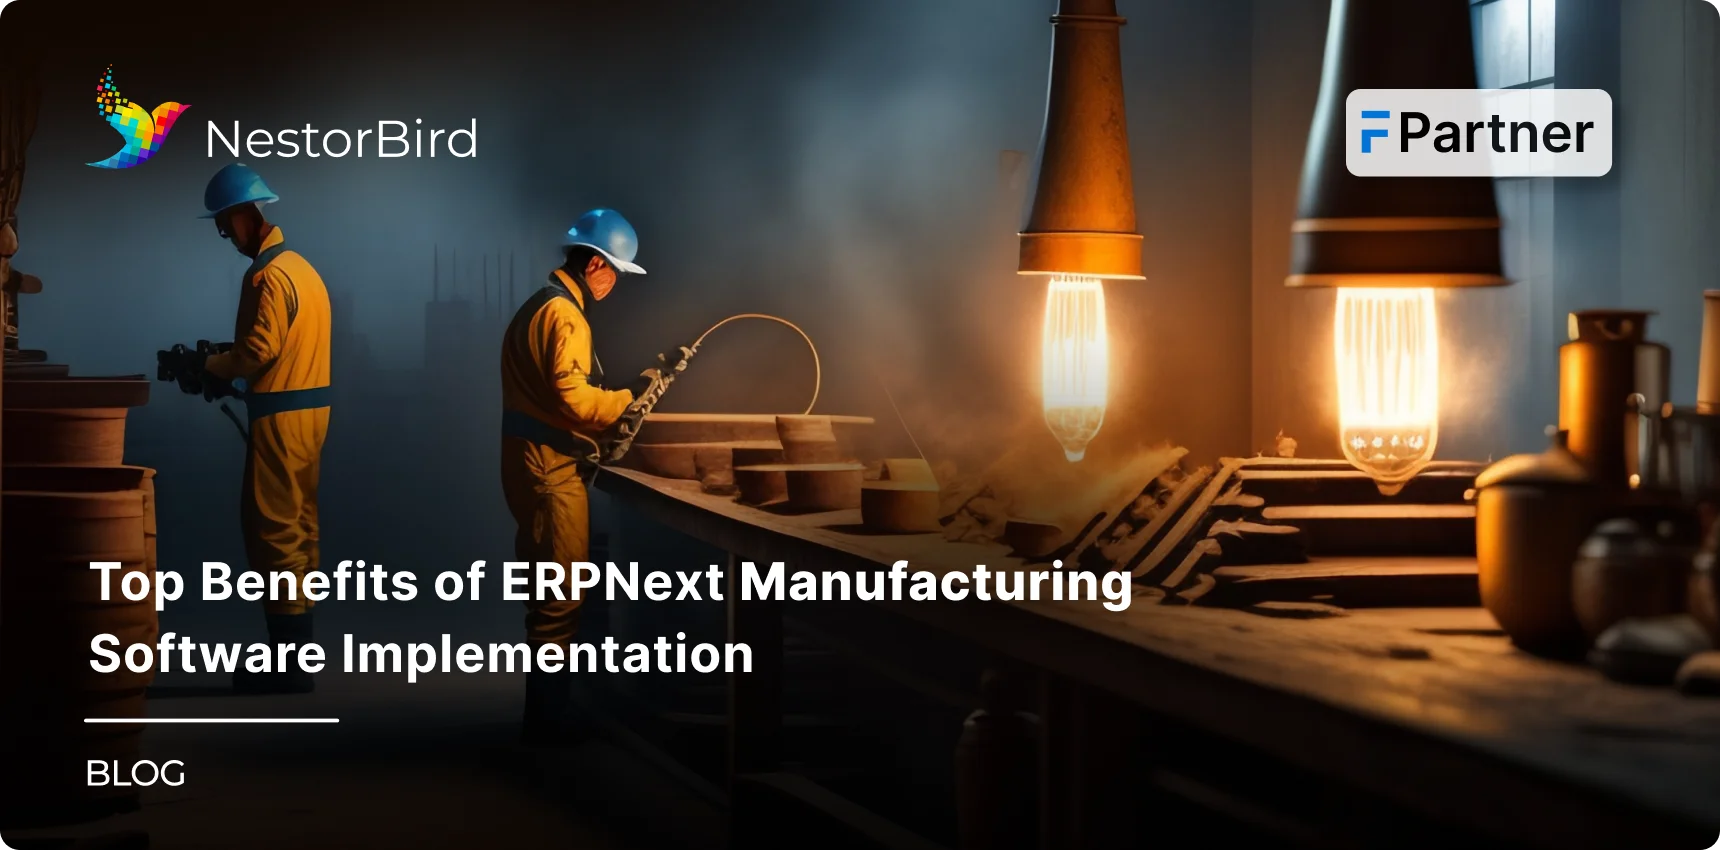 Top Benefits of ERPNext Manufacturing Software Implementation